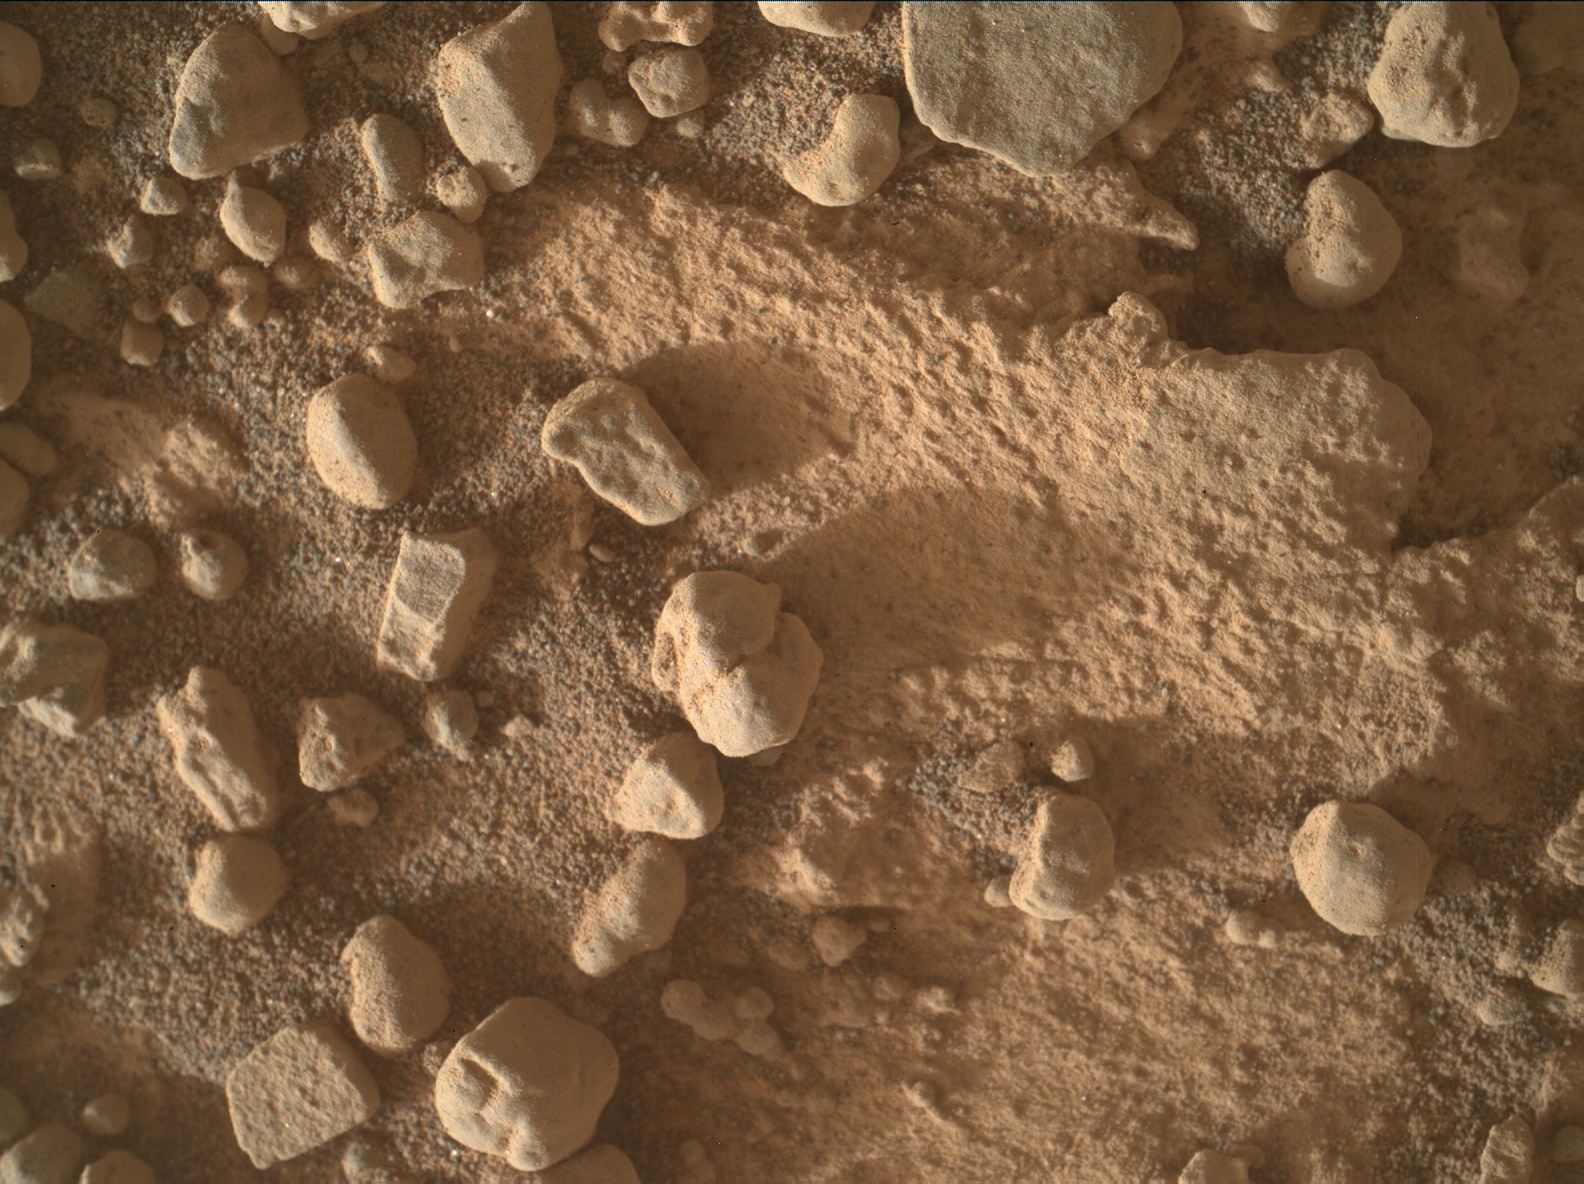 Nasa's Mars rover Curiosity acquired this image using its Mars Hand Lens Imager (MAHLI) on Sol 3541